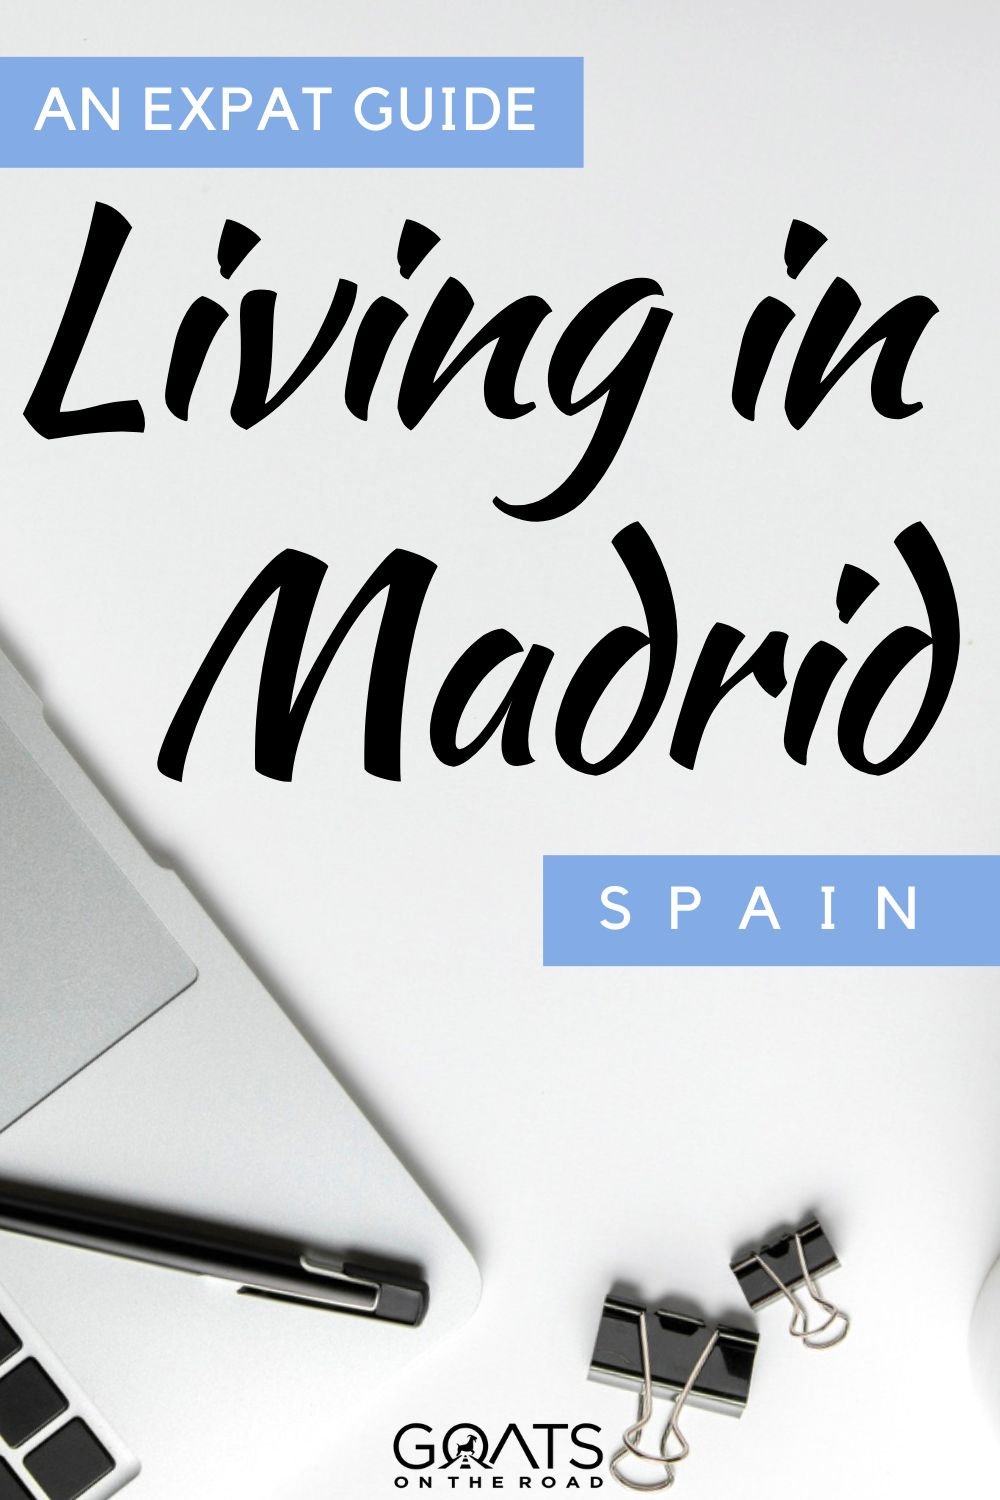 “Living in Madrid, Spain: An Expat Guide